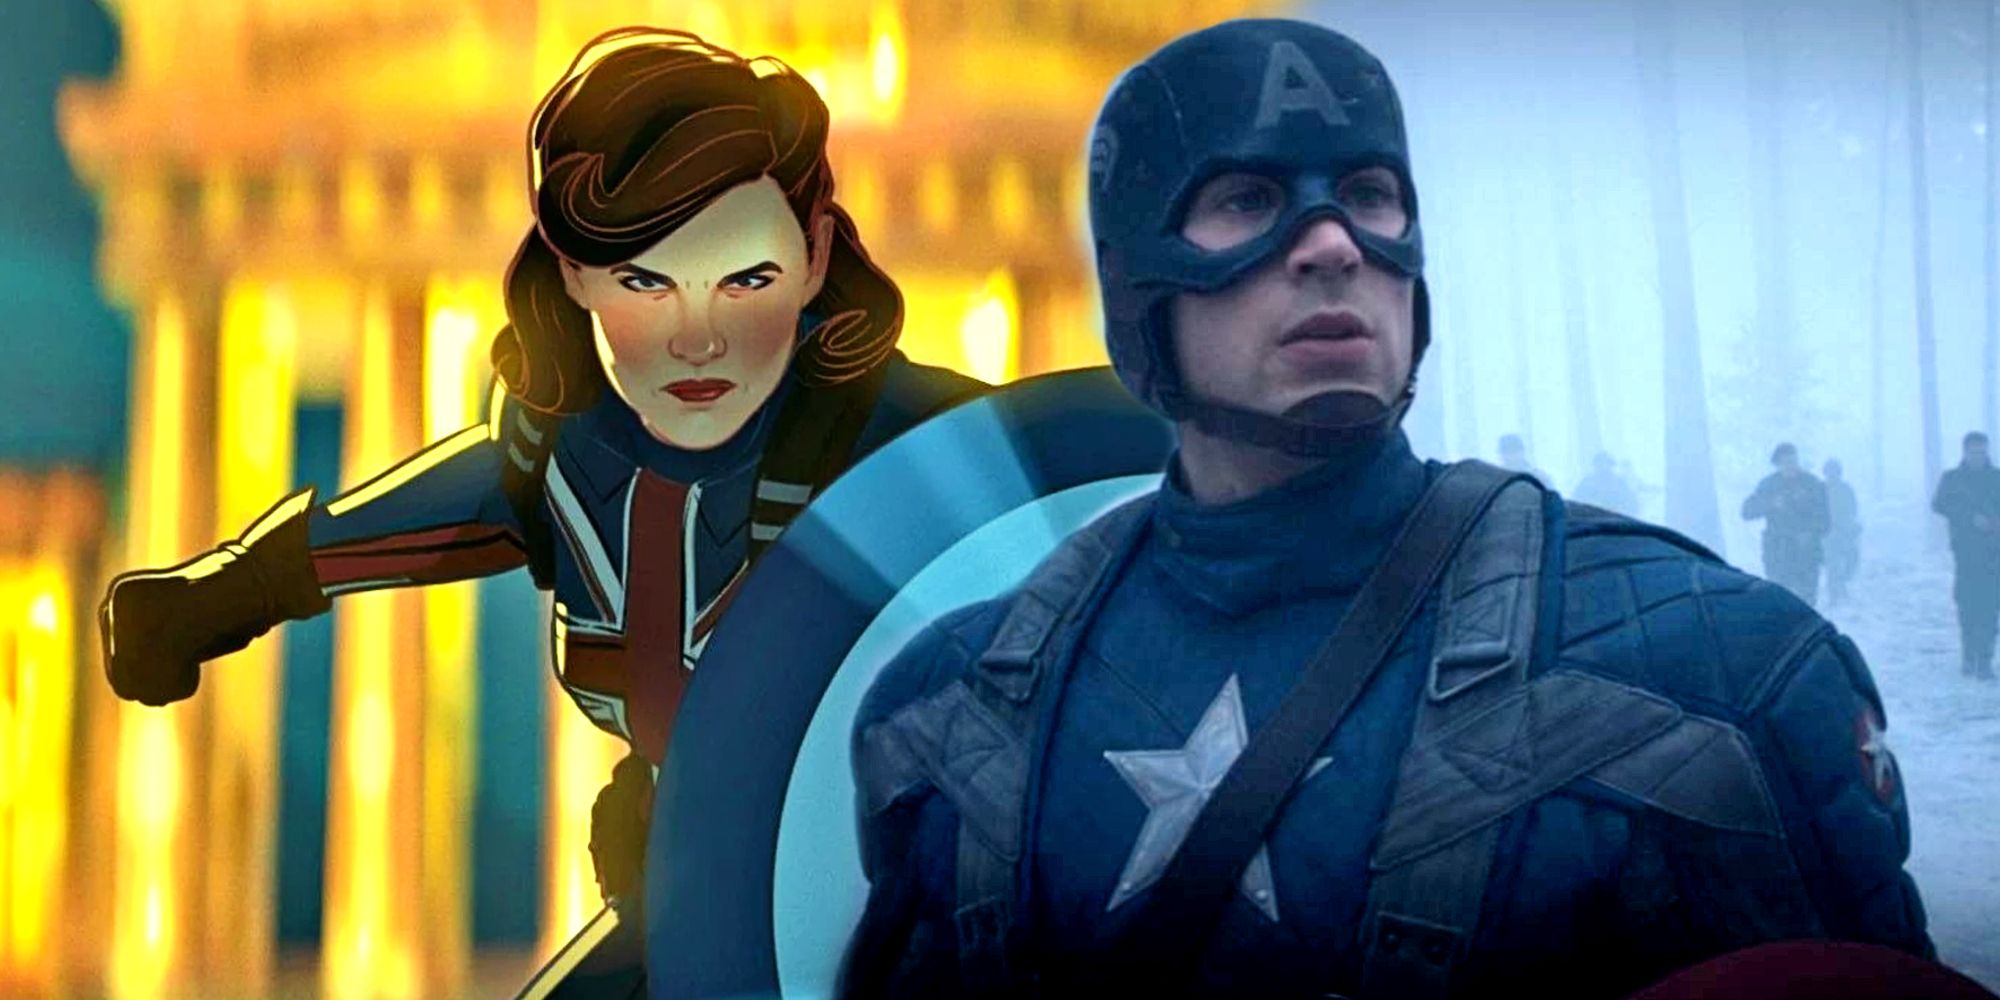 Every What If Episode 1 Scene Compared To Captain America The First Avenger